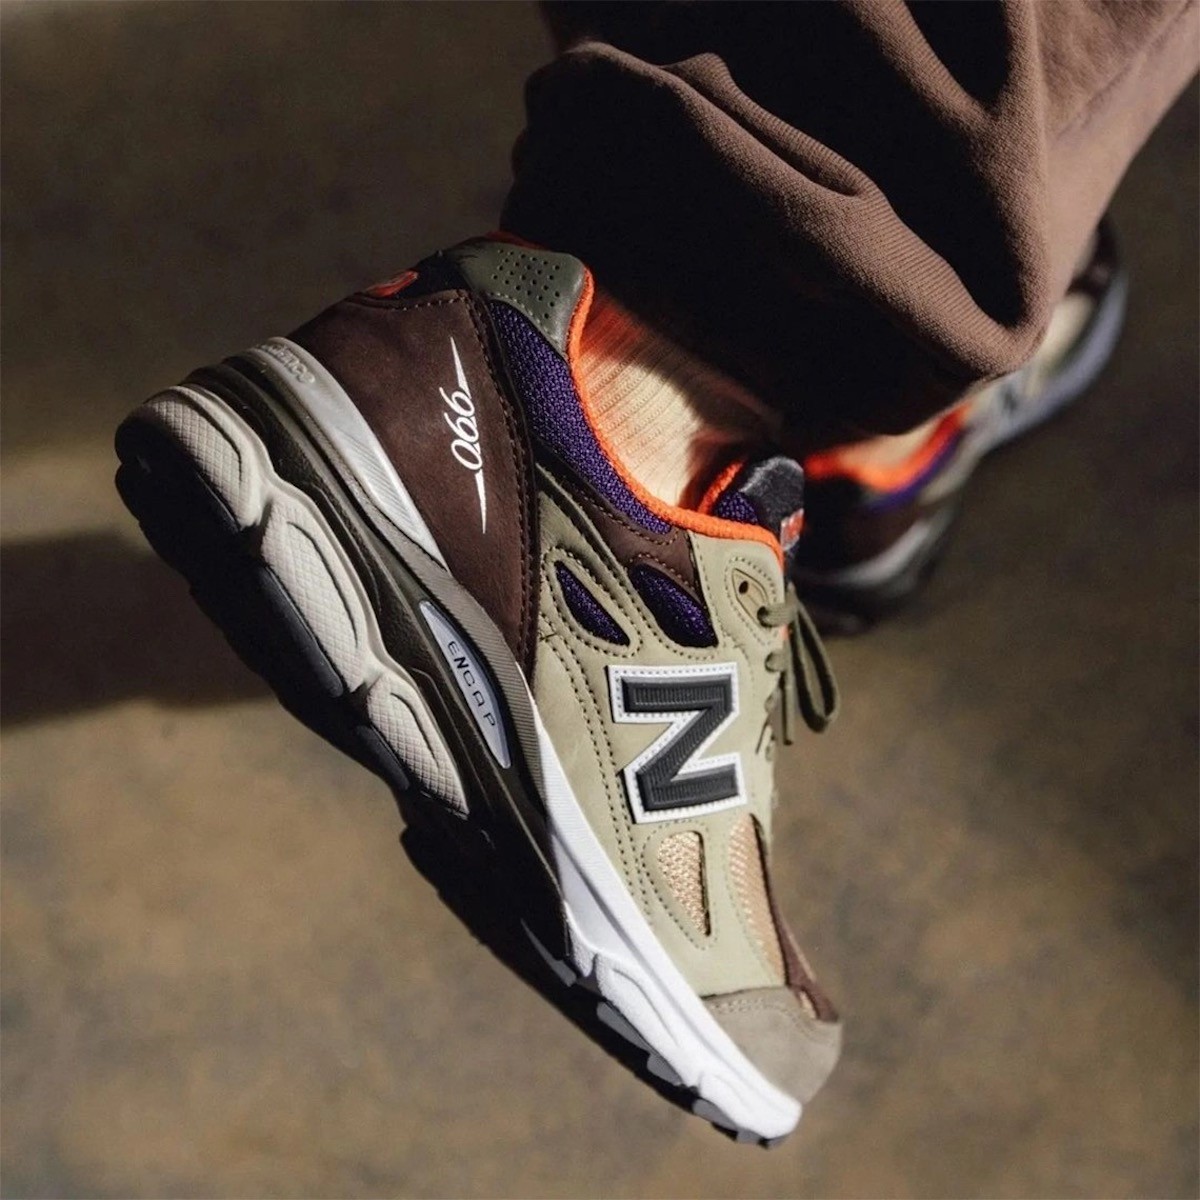 New Balance 990v3 Made In USA Olive - Sneakers.fr